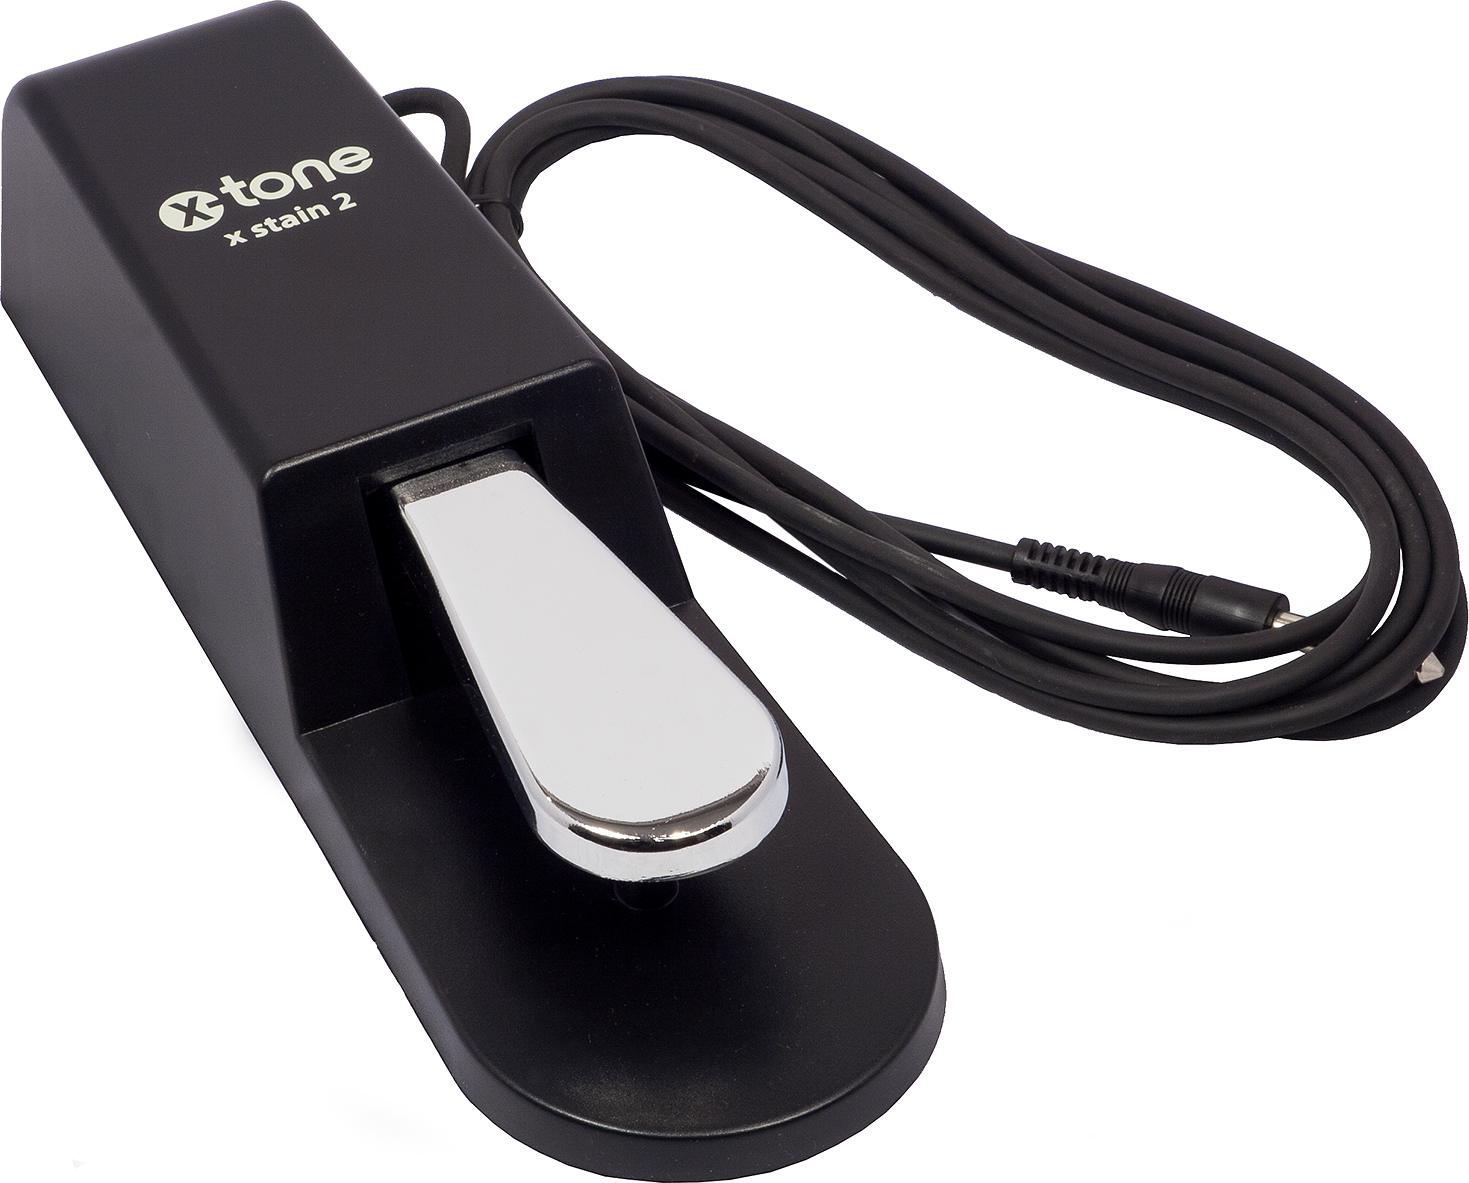 X-tone X-stain 2 - Sustain pedal for Keyboard - Main picture